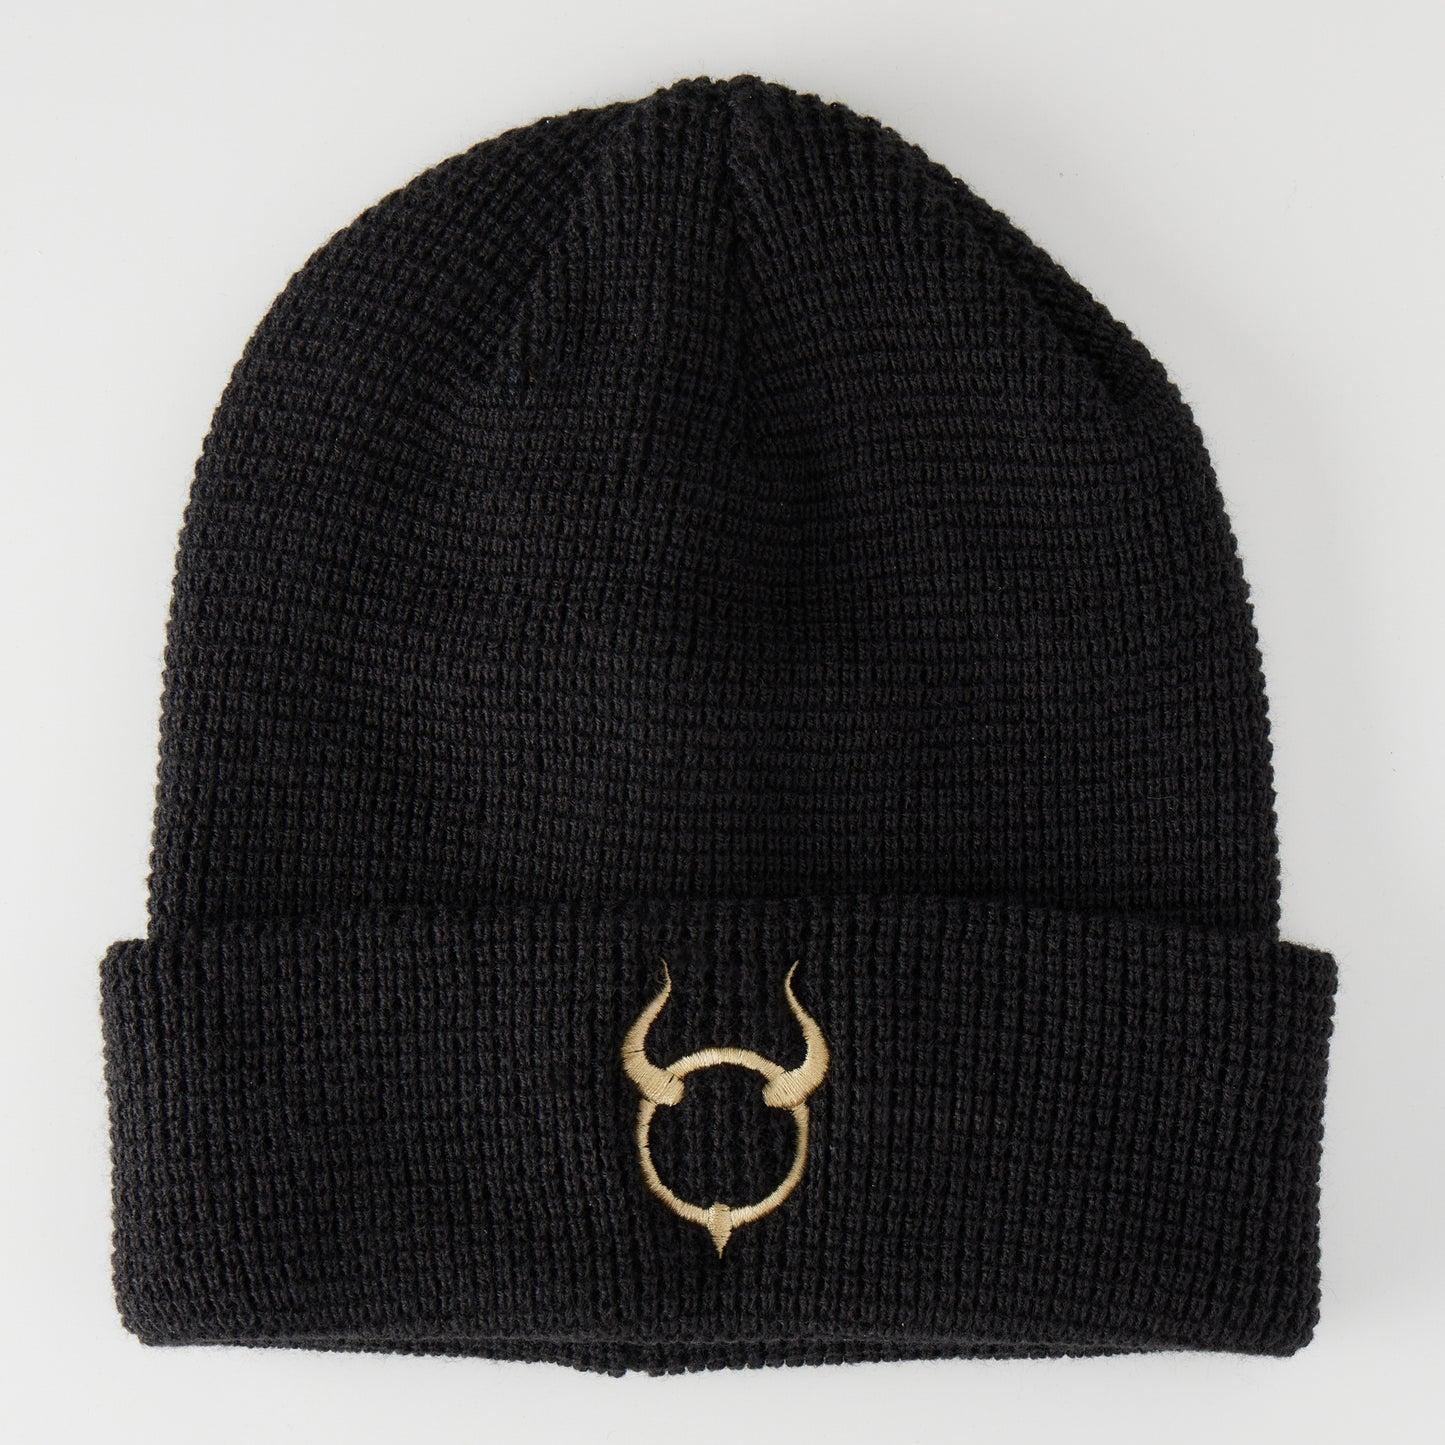 Port Authority® Thermal Knit Cuffed Beanie (Black)